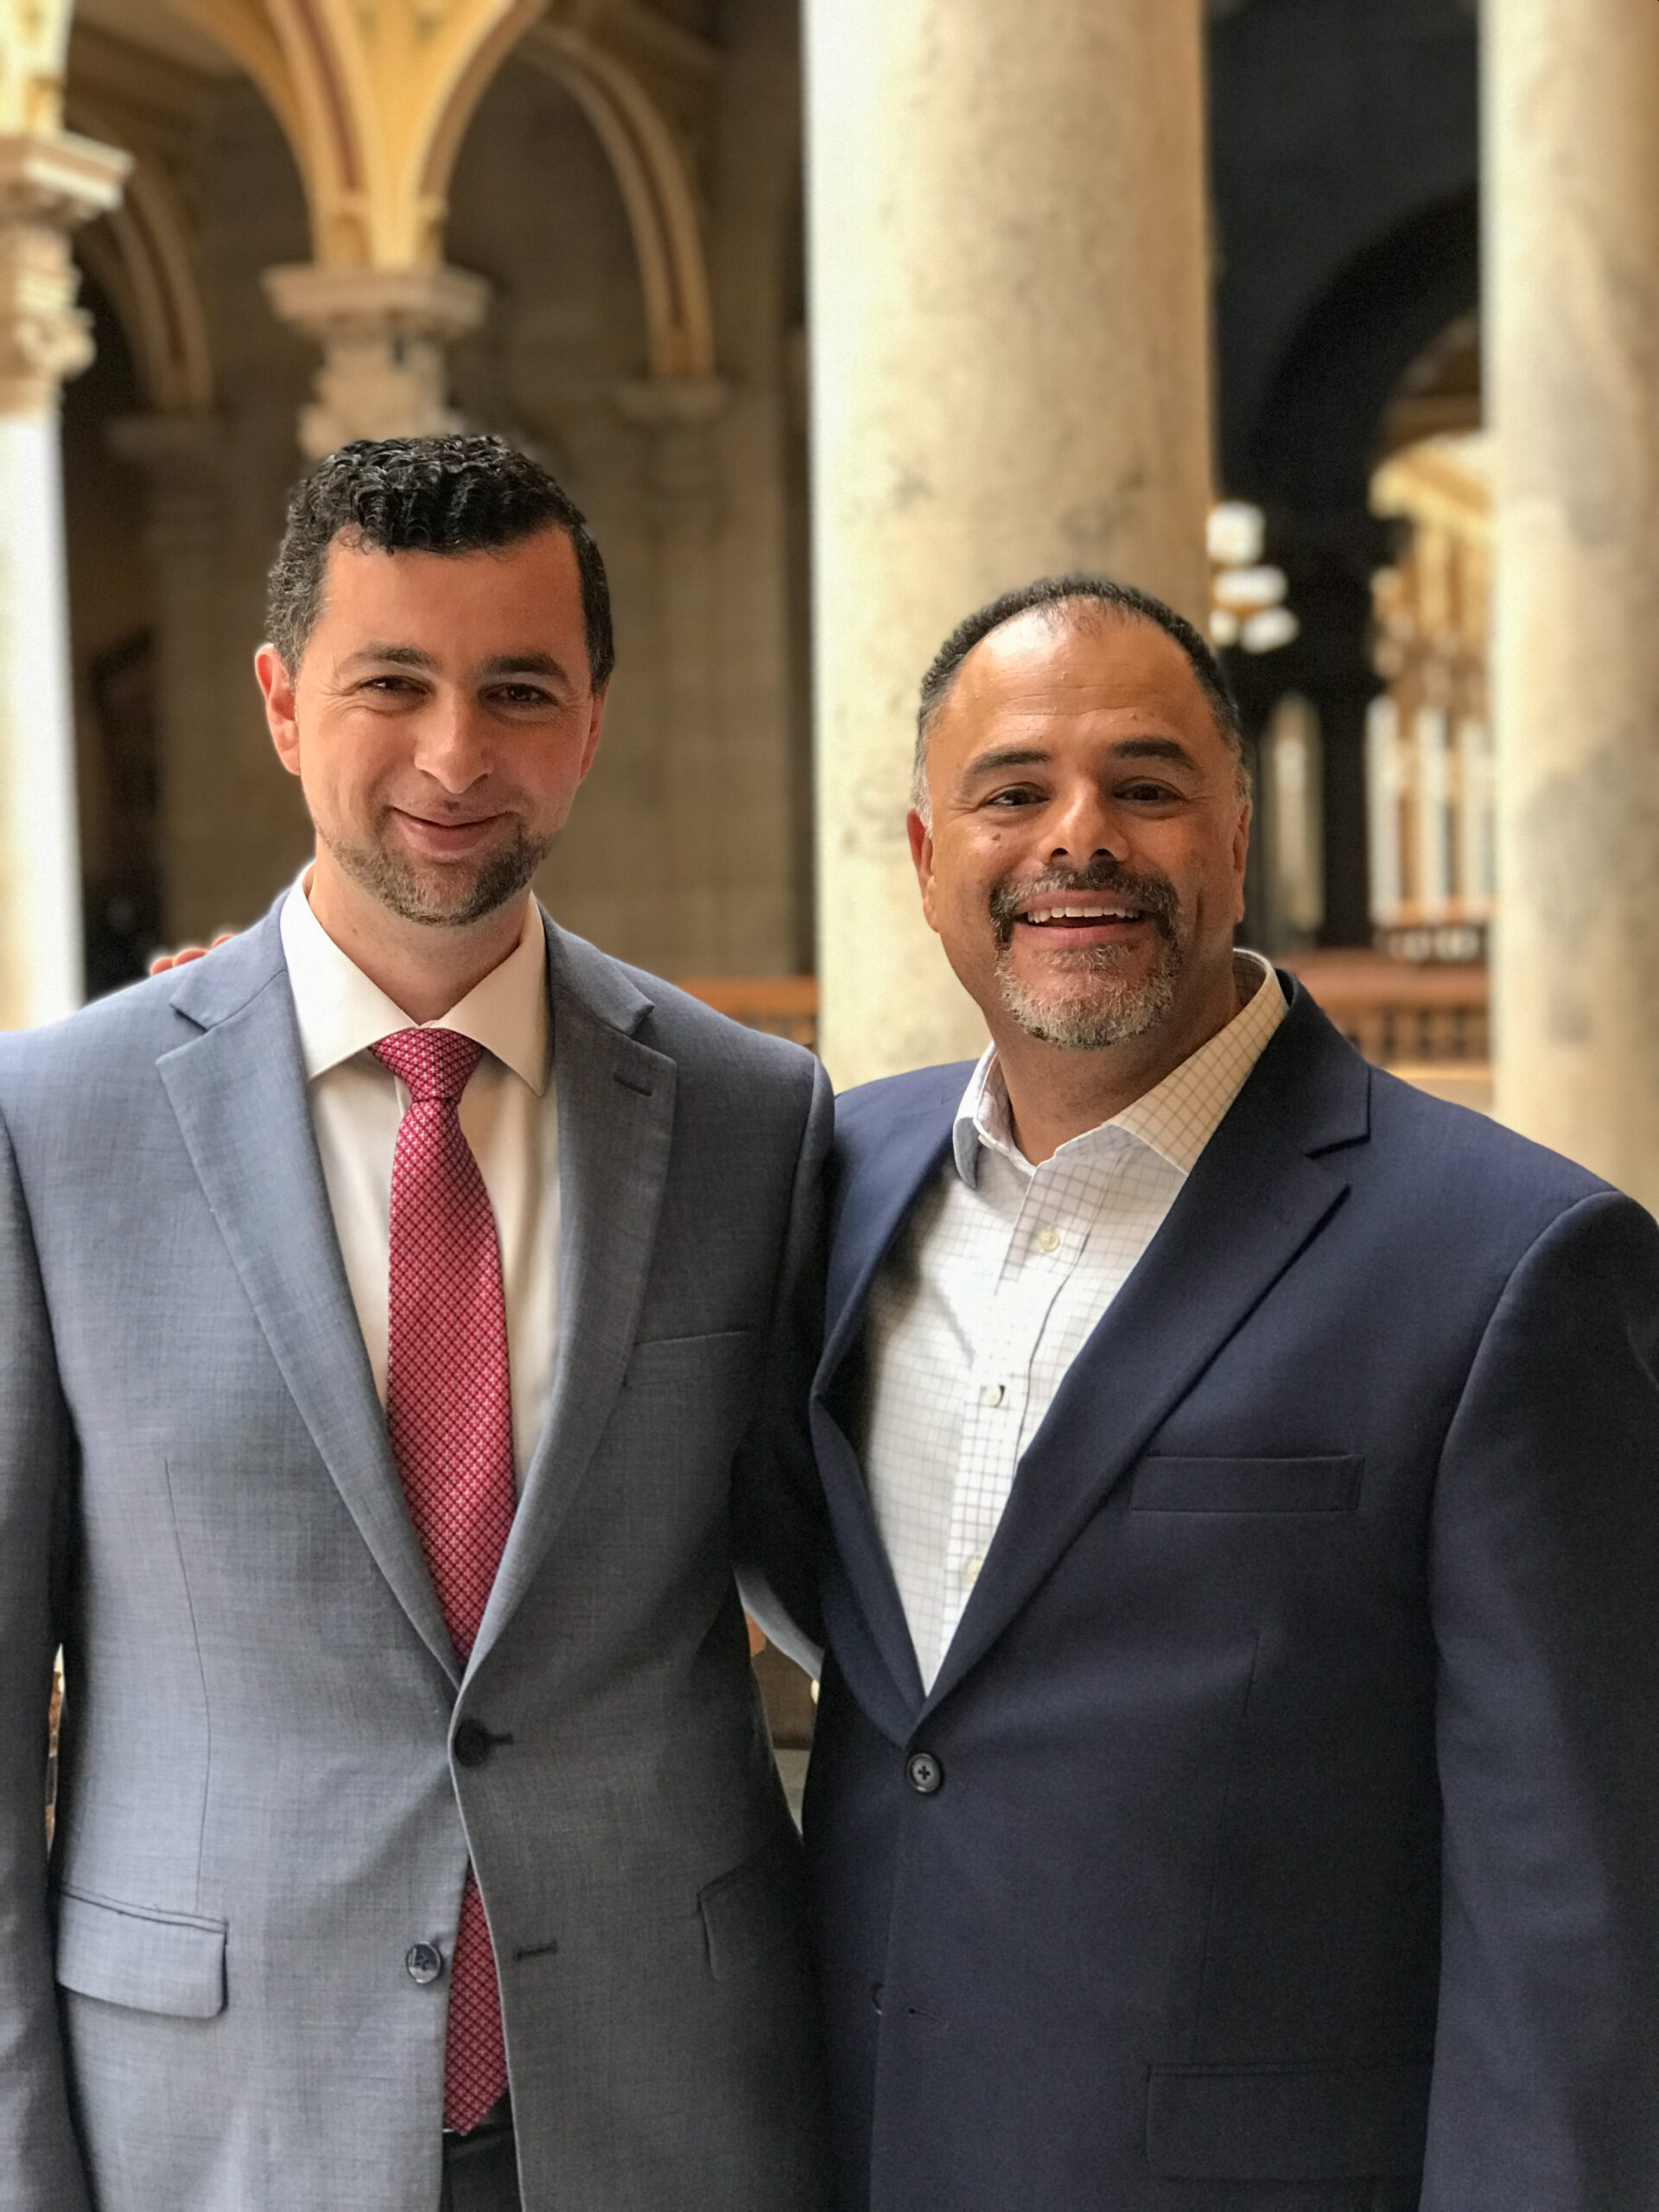 Two Arab men in suits pose for a picture together